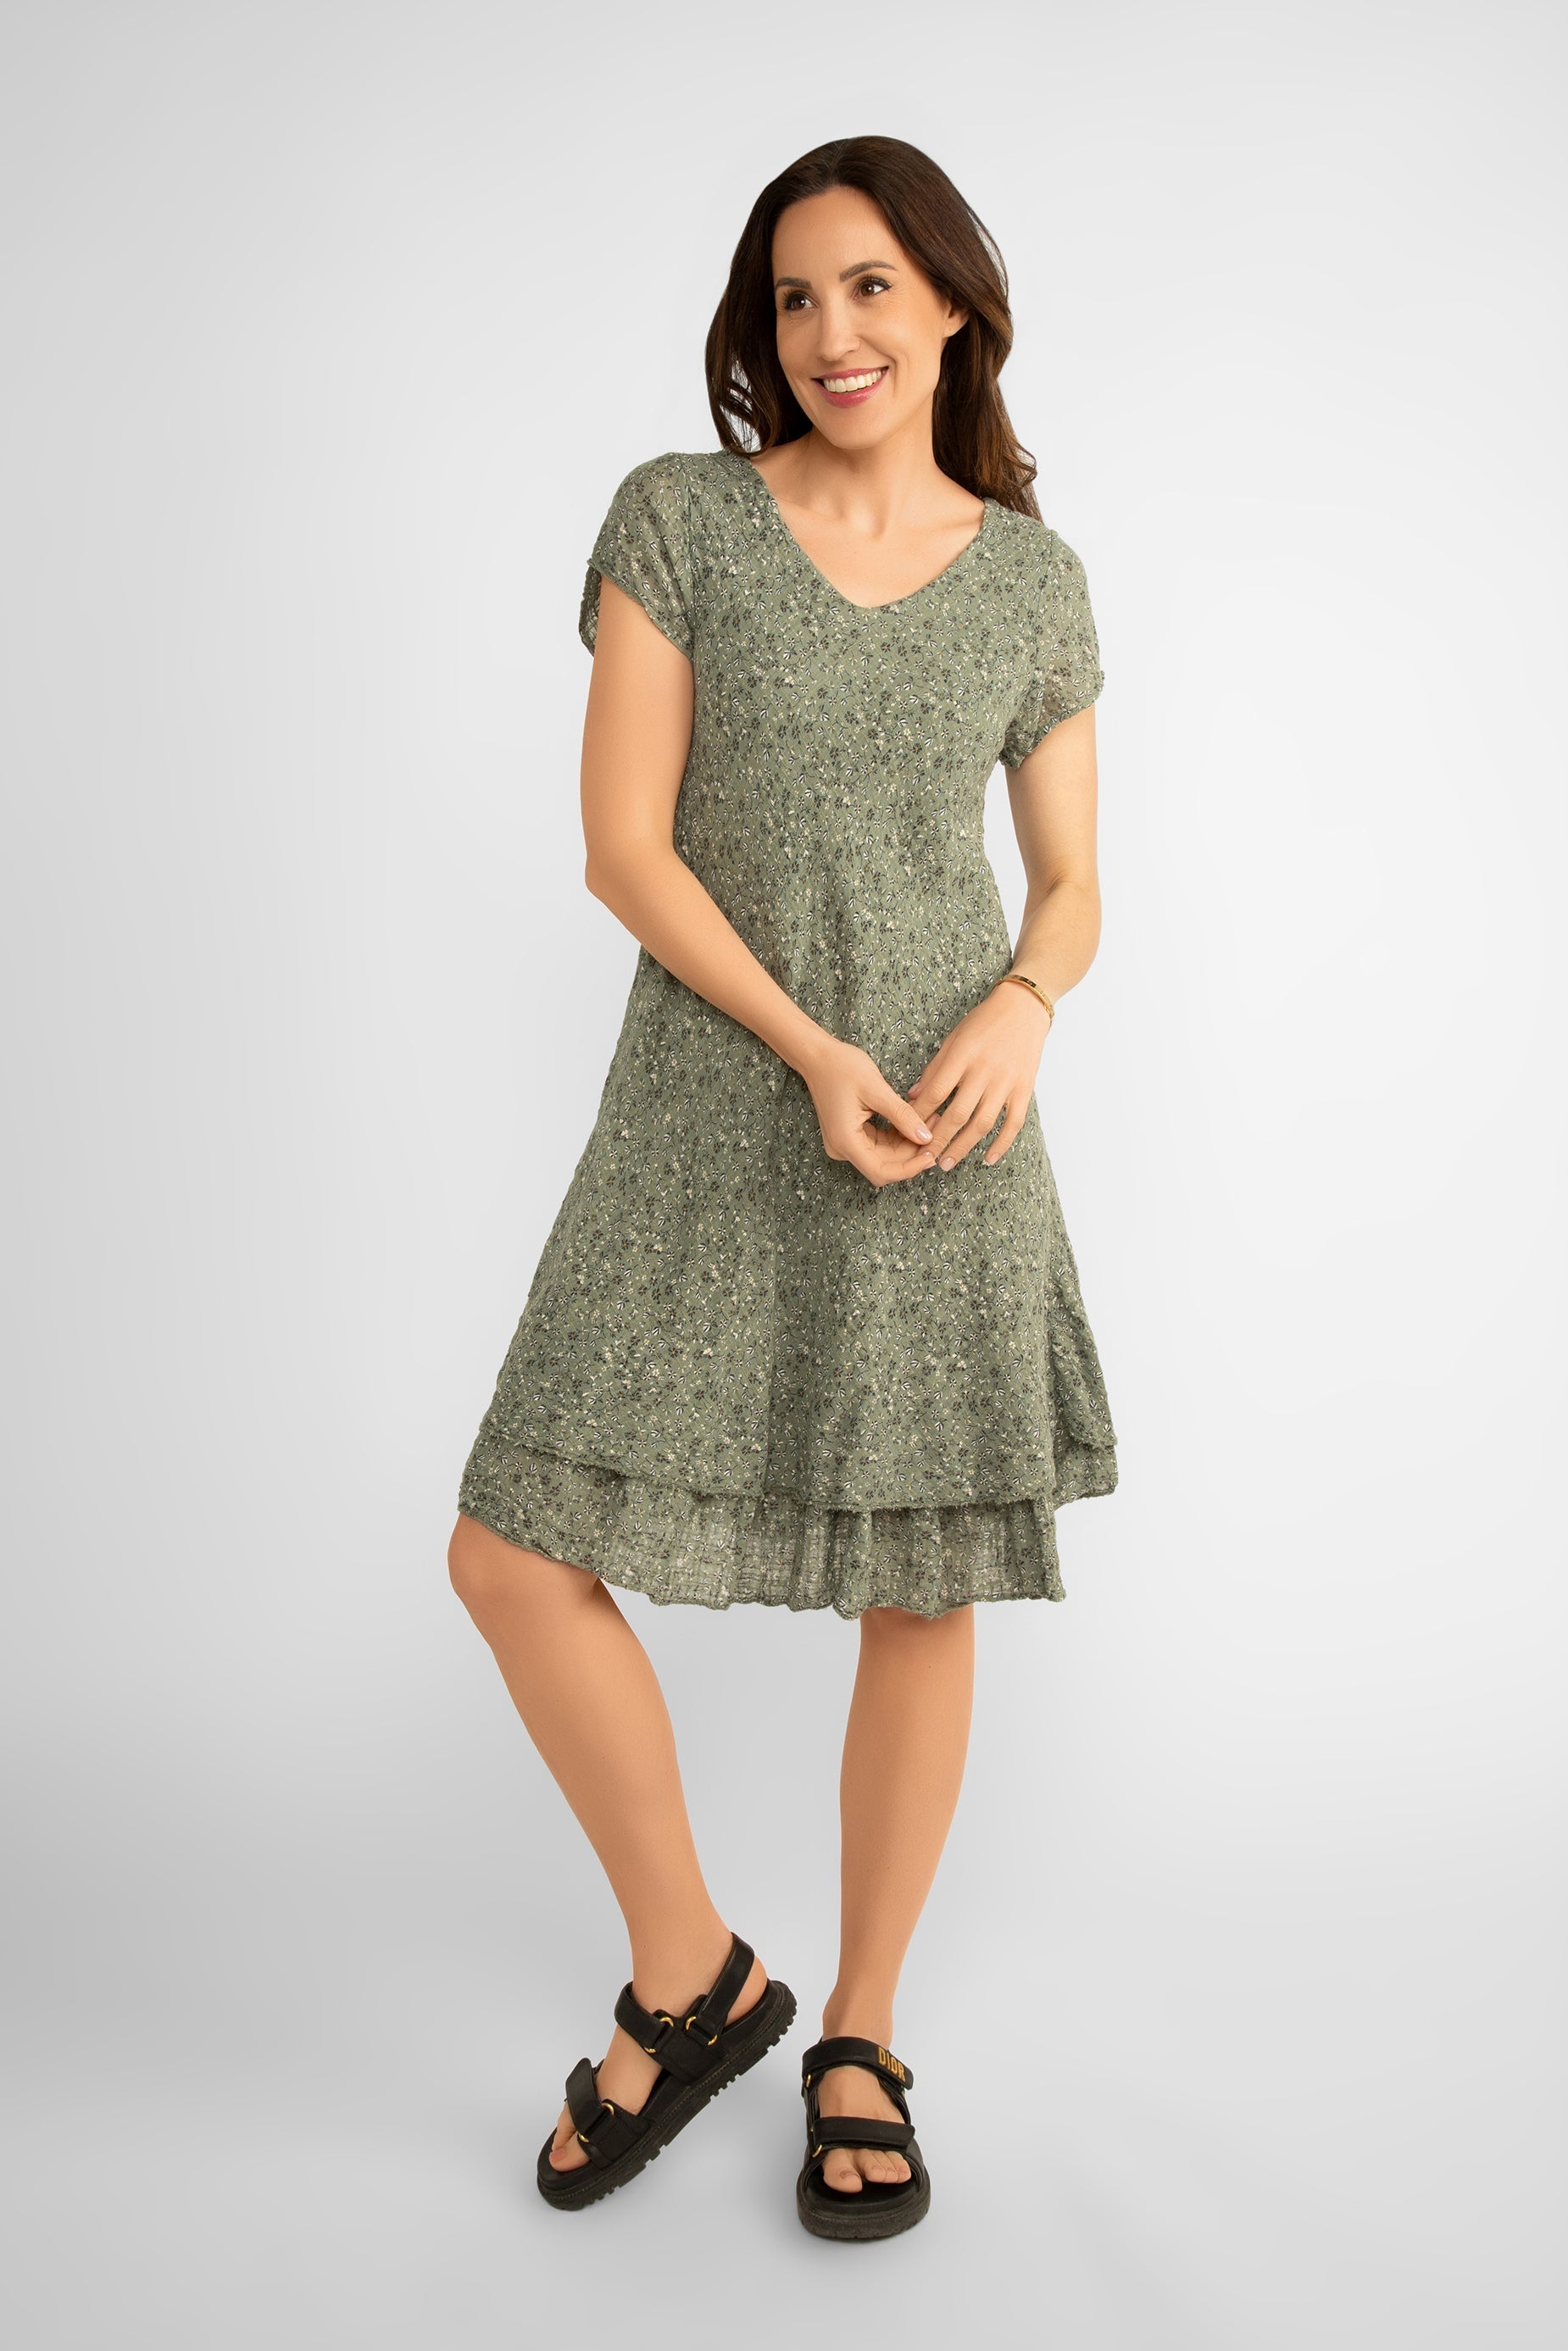 Front view of Bella Amore (6859B) Women's Short Sleeve V-Neck Knee Length Skirt in Military Green Ditsy Floral Print